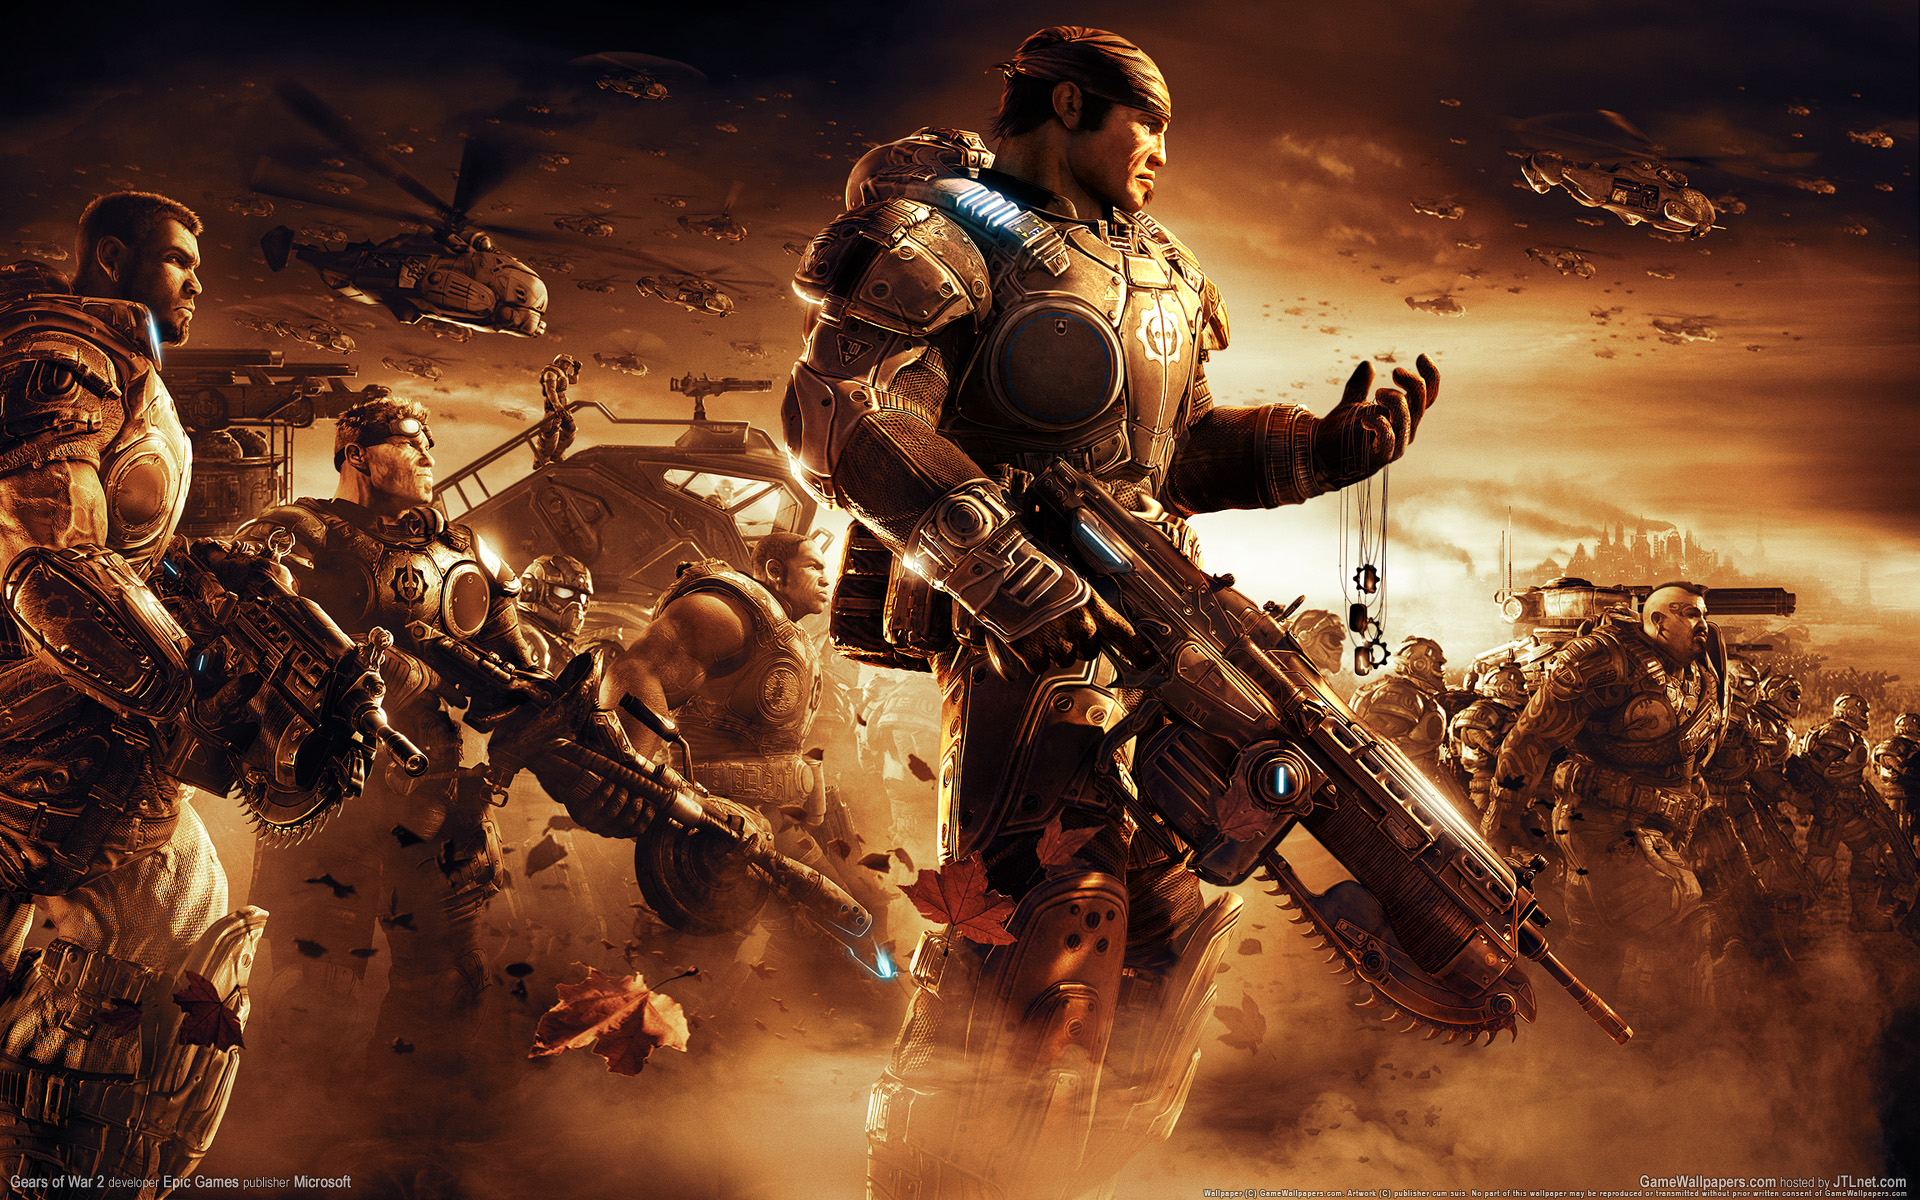  Awesome 3D Game Wallpapers Gears of War Downloads TechMynd